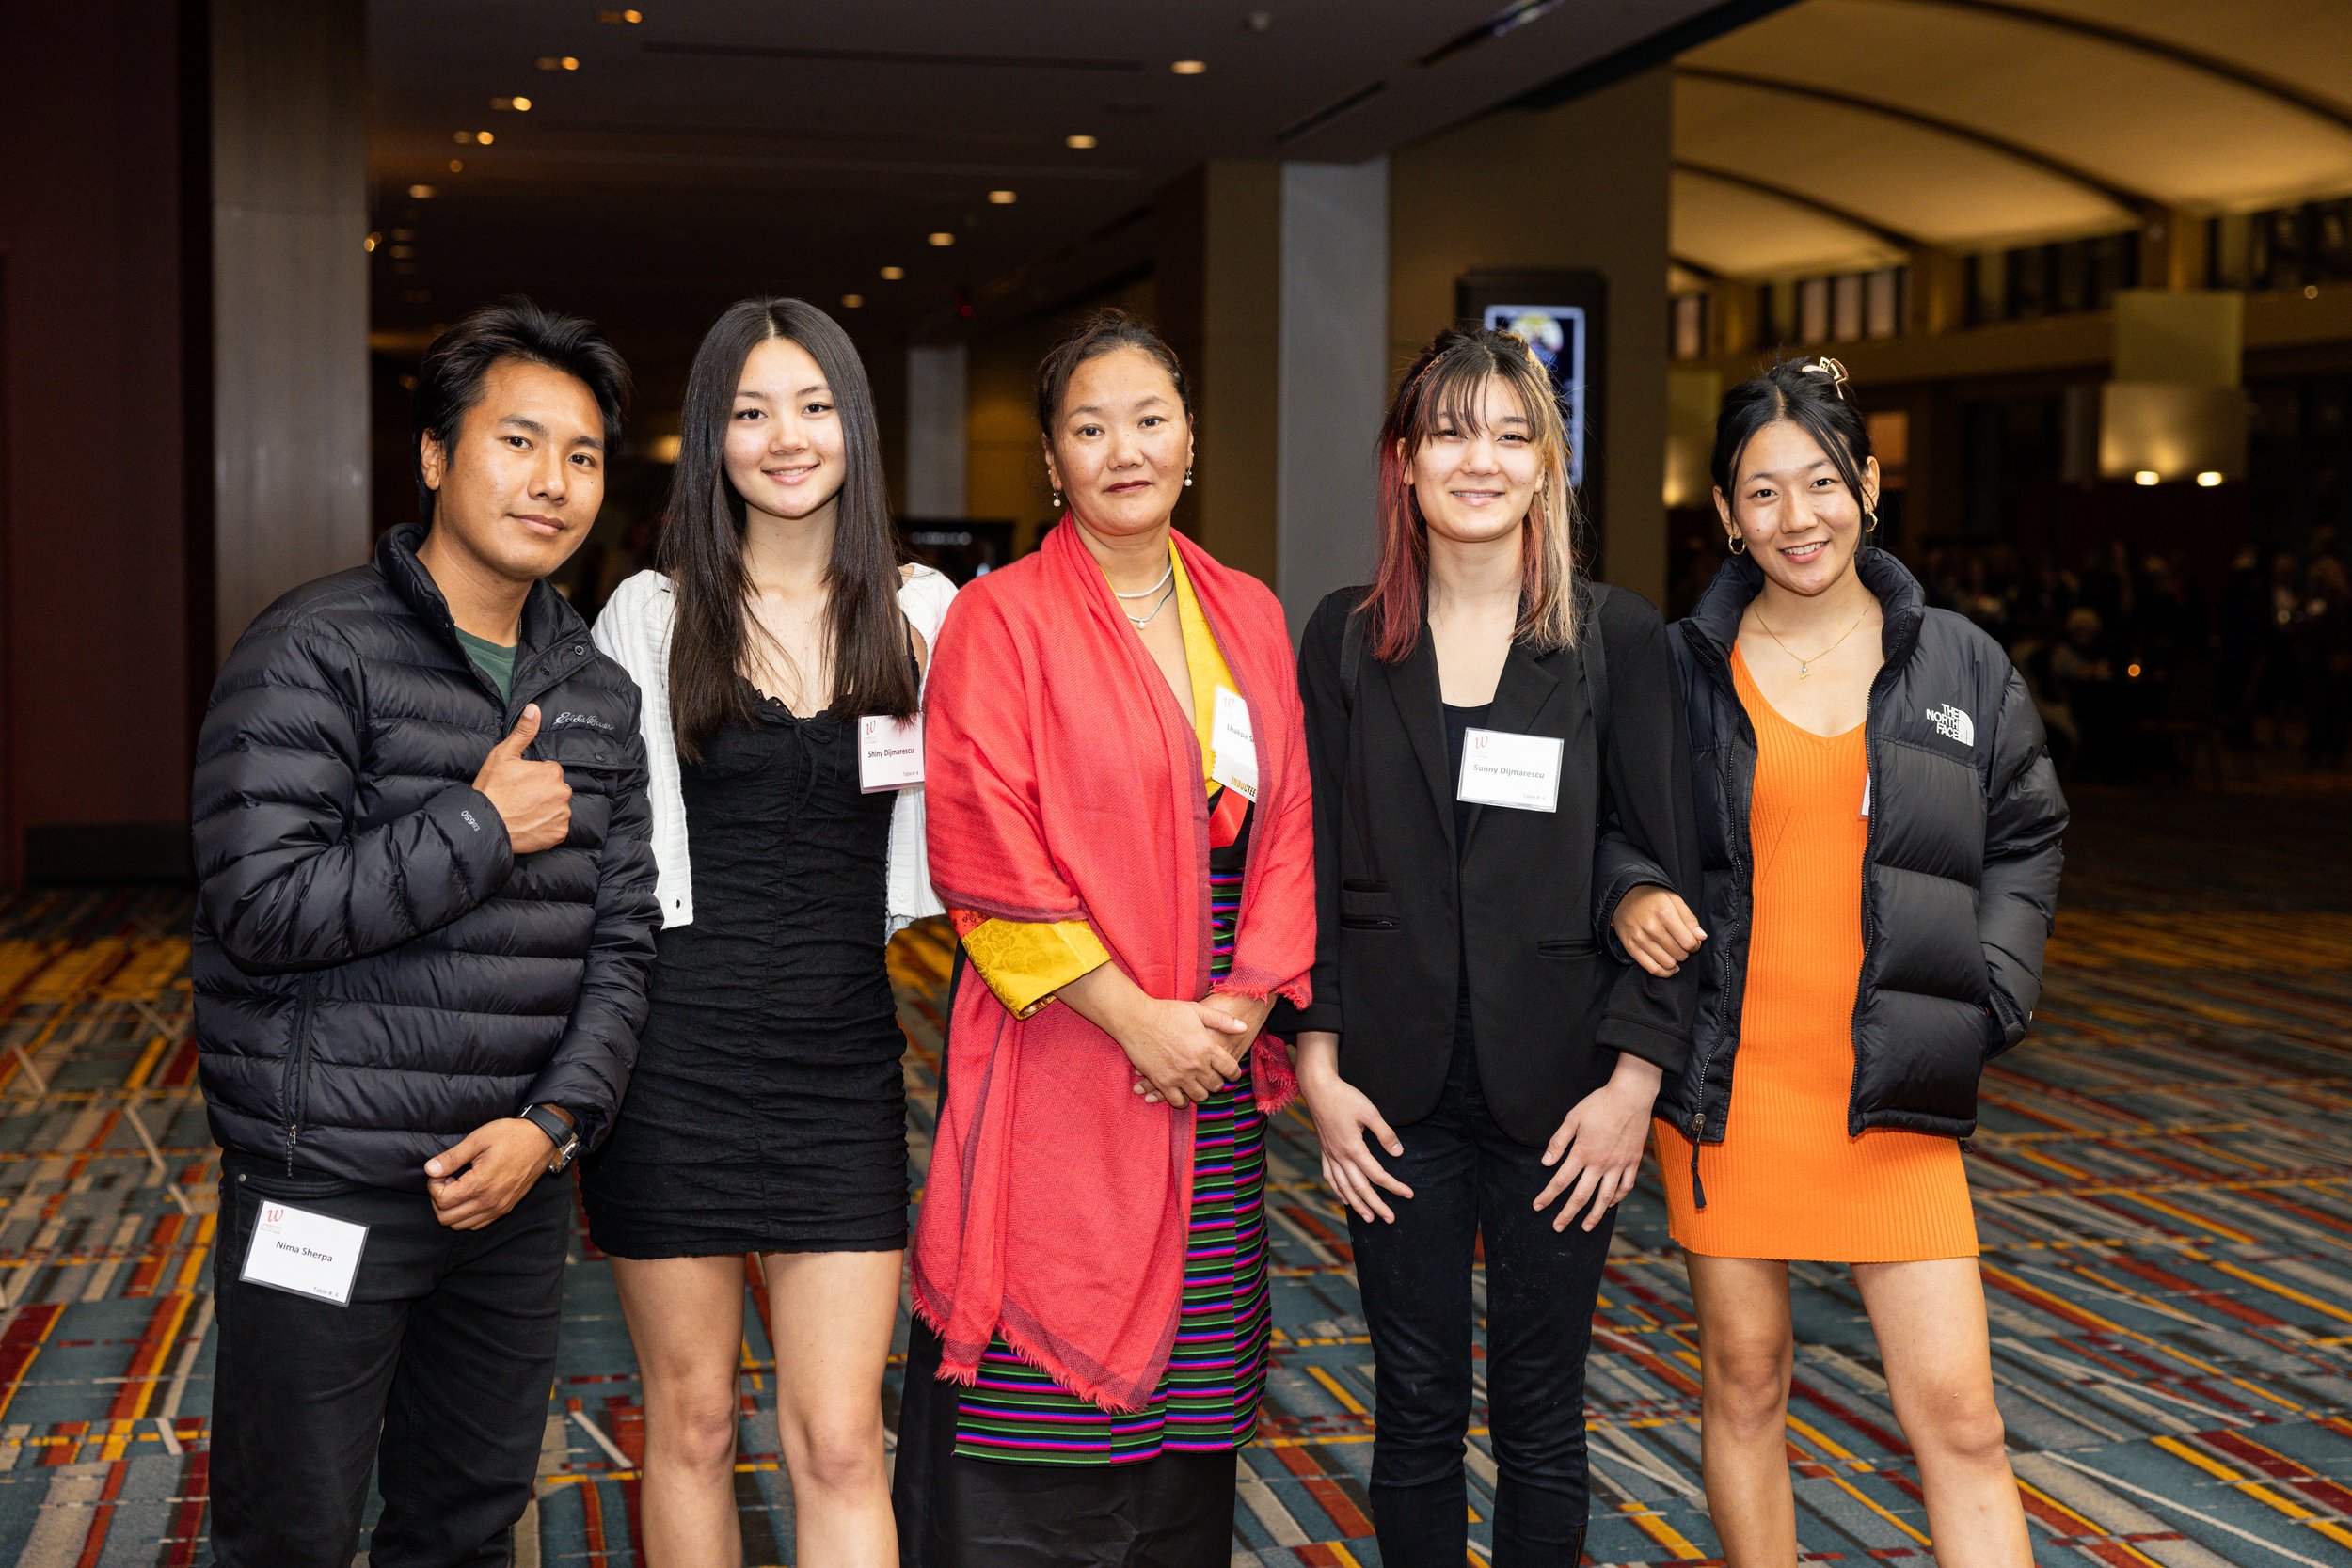 2022 Inductee | Lhakpa Sherpa and her family